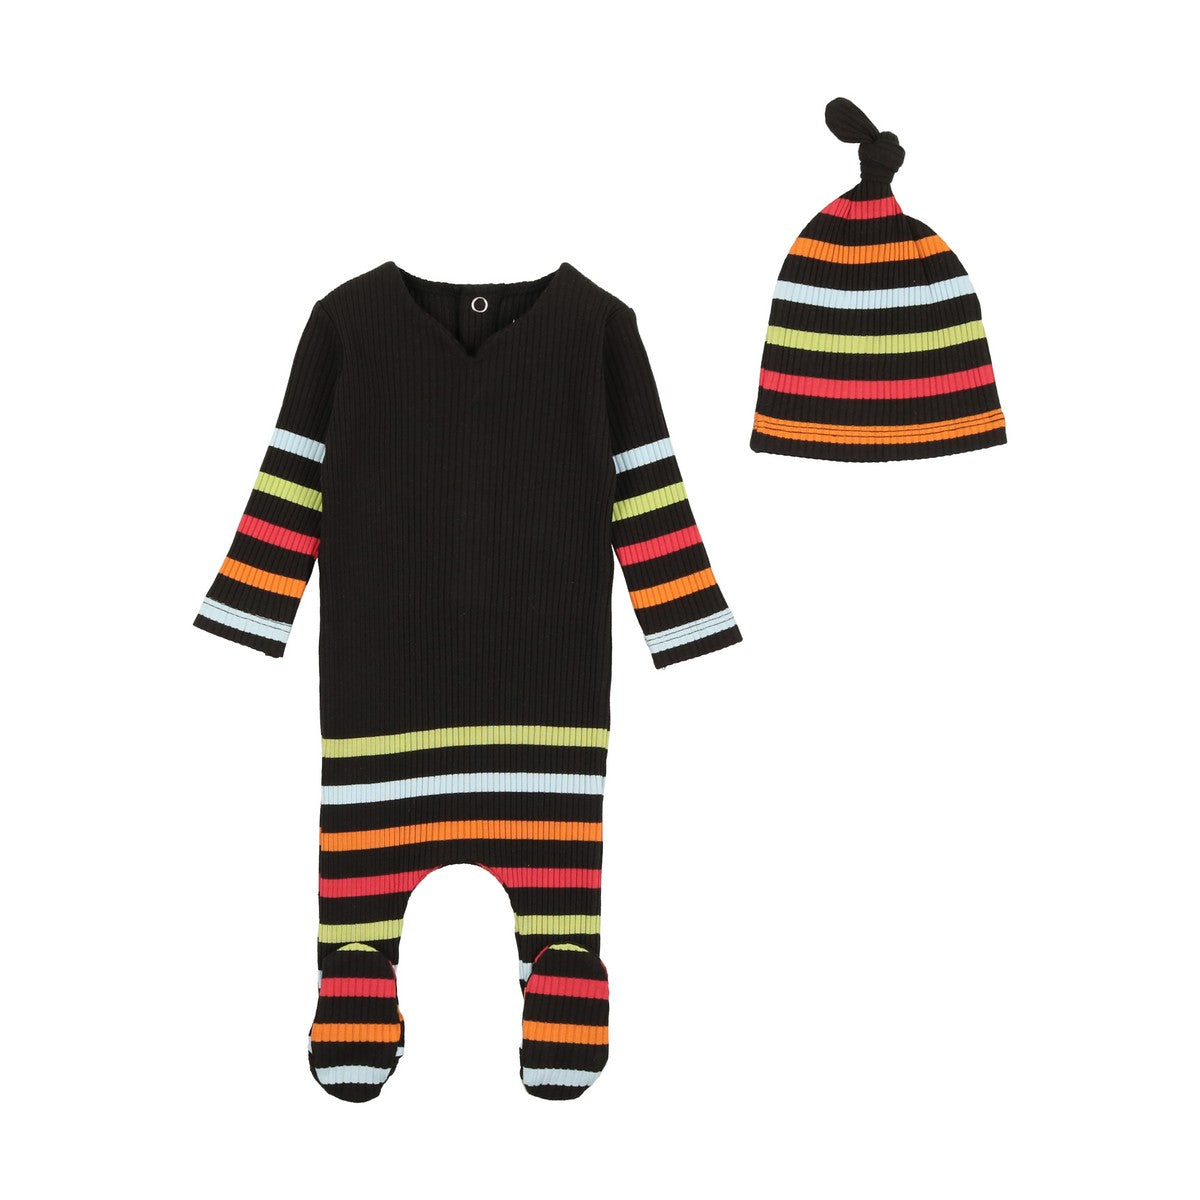  Bee & Dee Black Multi Stripe Footie with Beanie Rich text editor